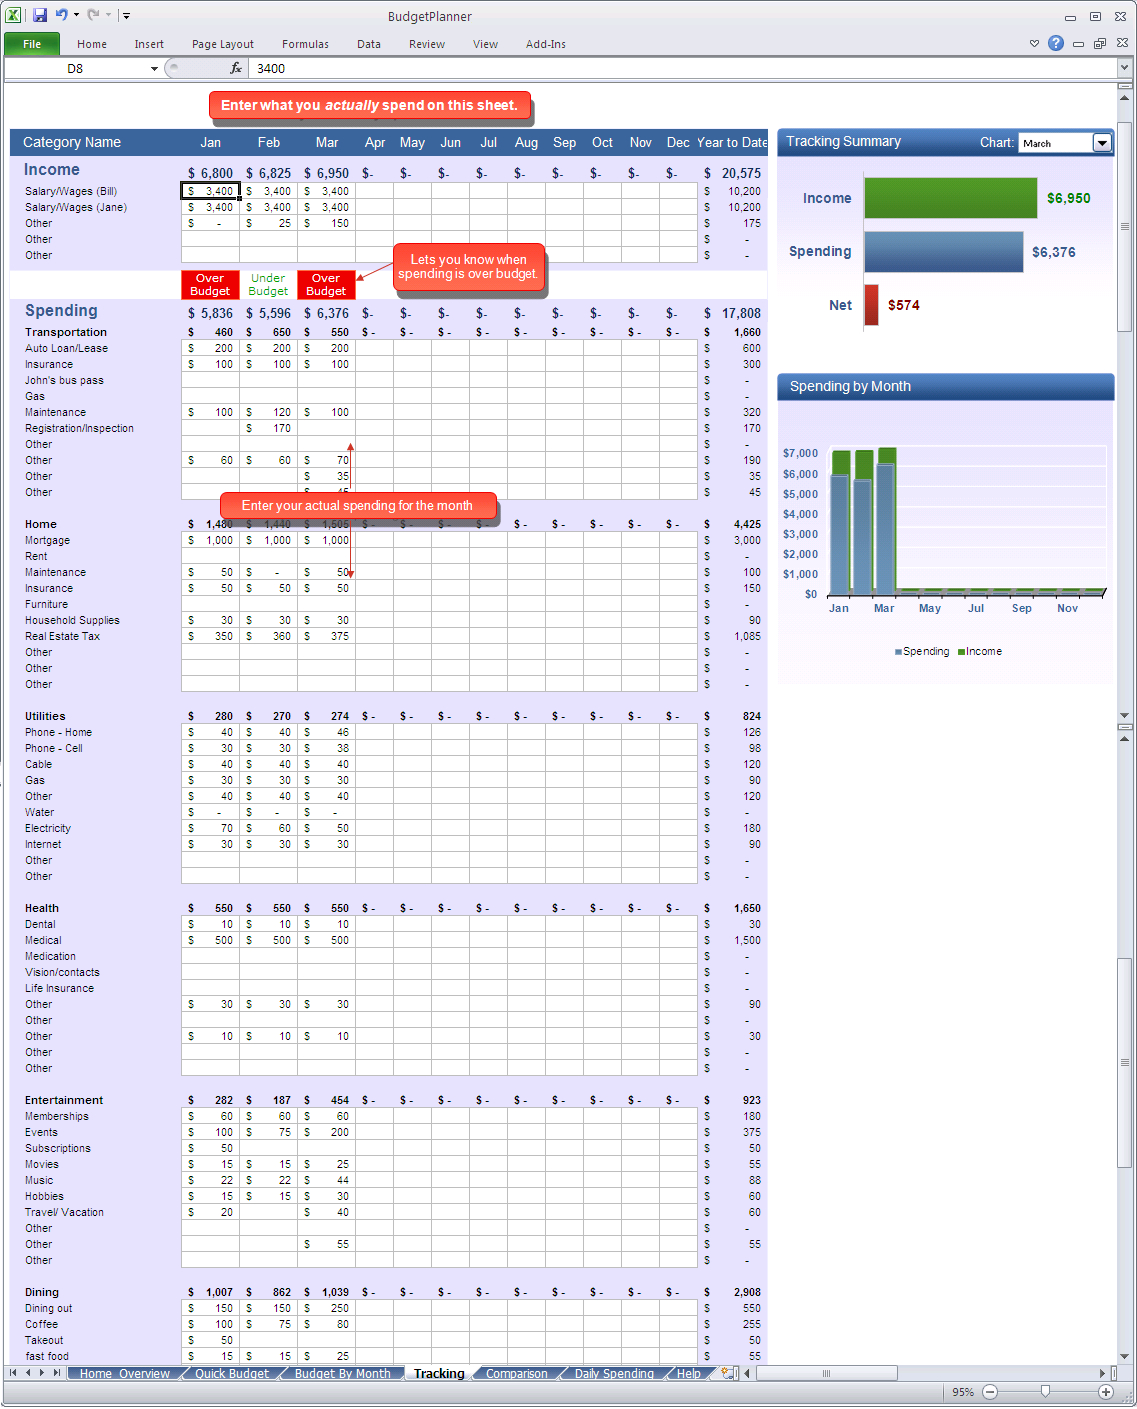 Budget Planner - Tracking Spreadsheet throughout Business Budget Planner Spreadsheet